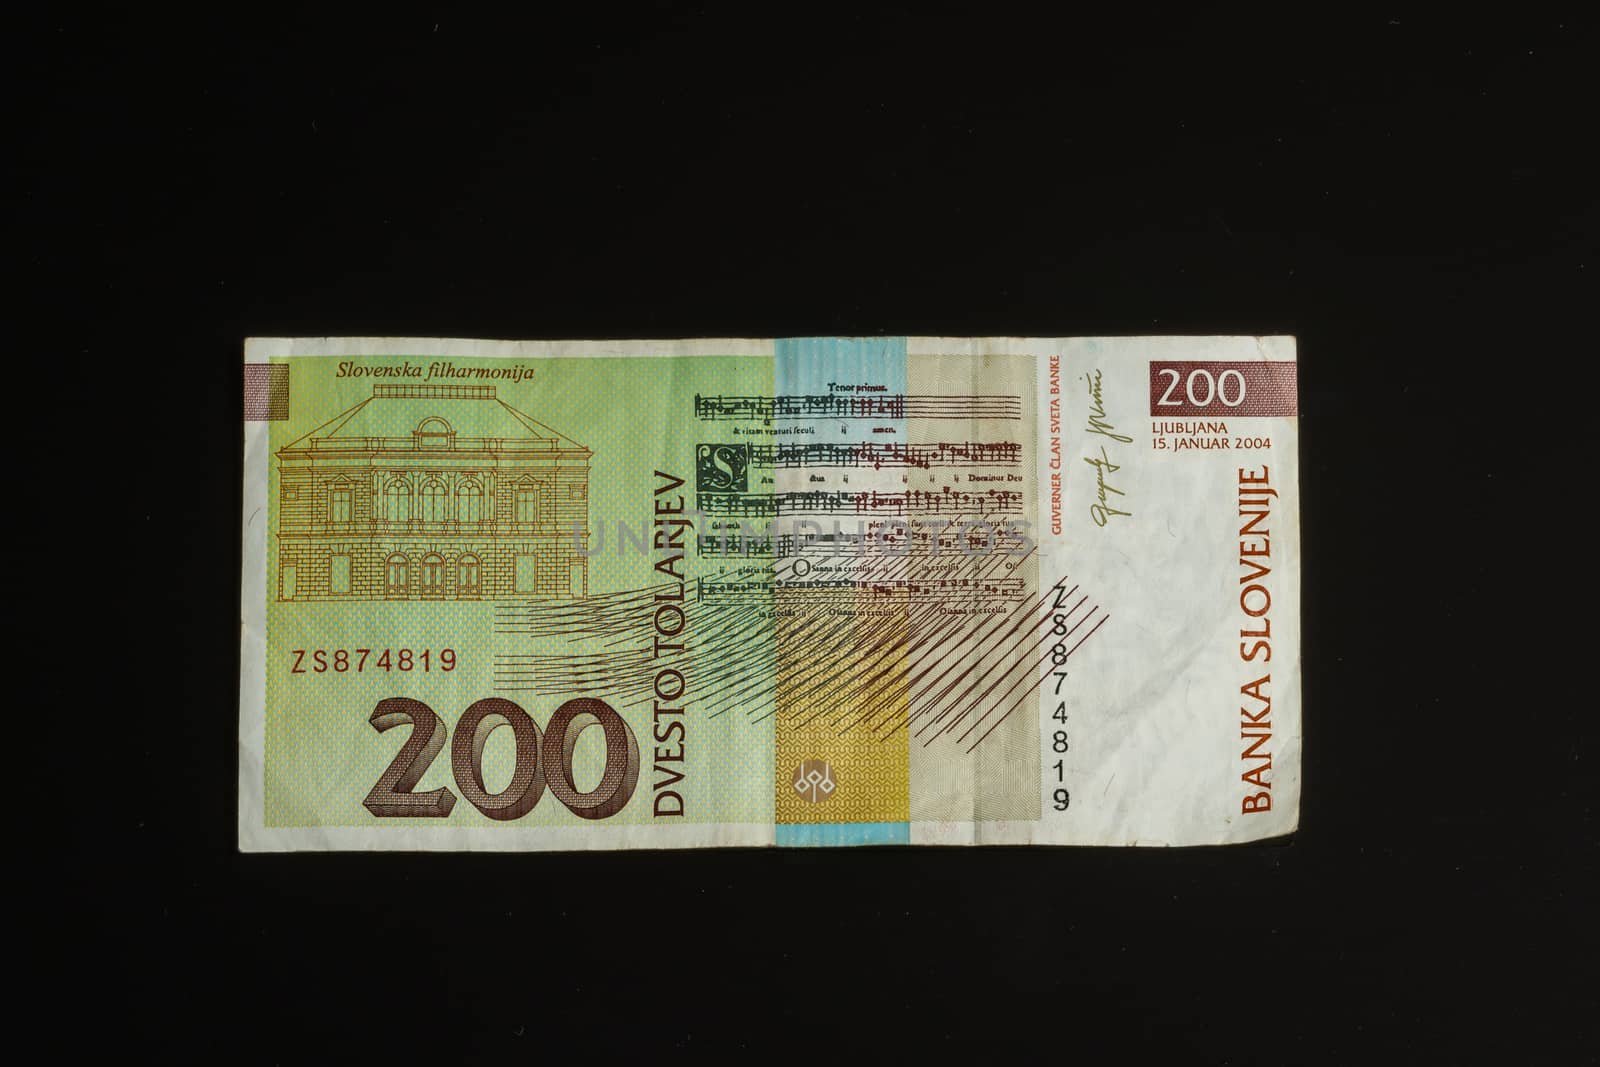 Obsolete 200 tolar bill of Slovenia, became obsolete with introduction of Euro currency, isolated on black background